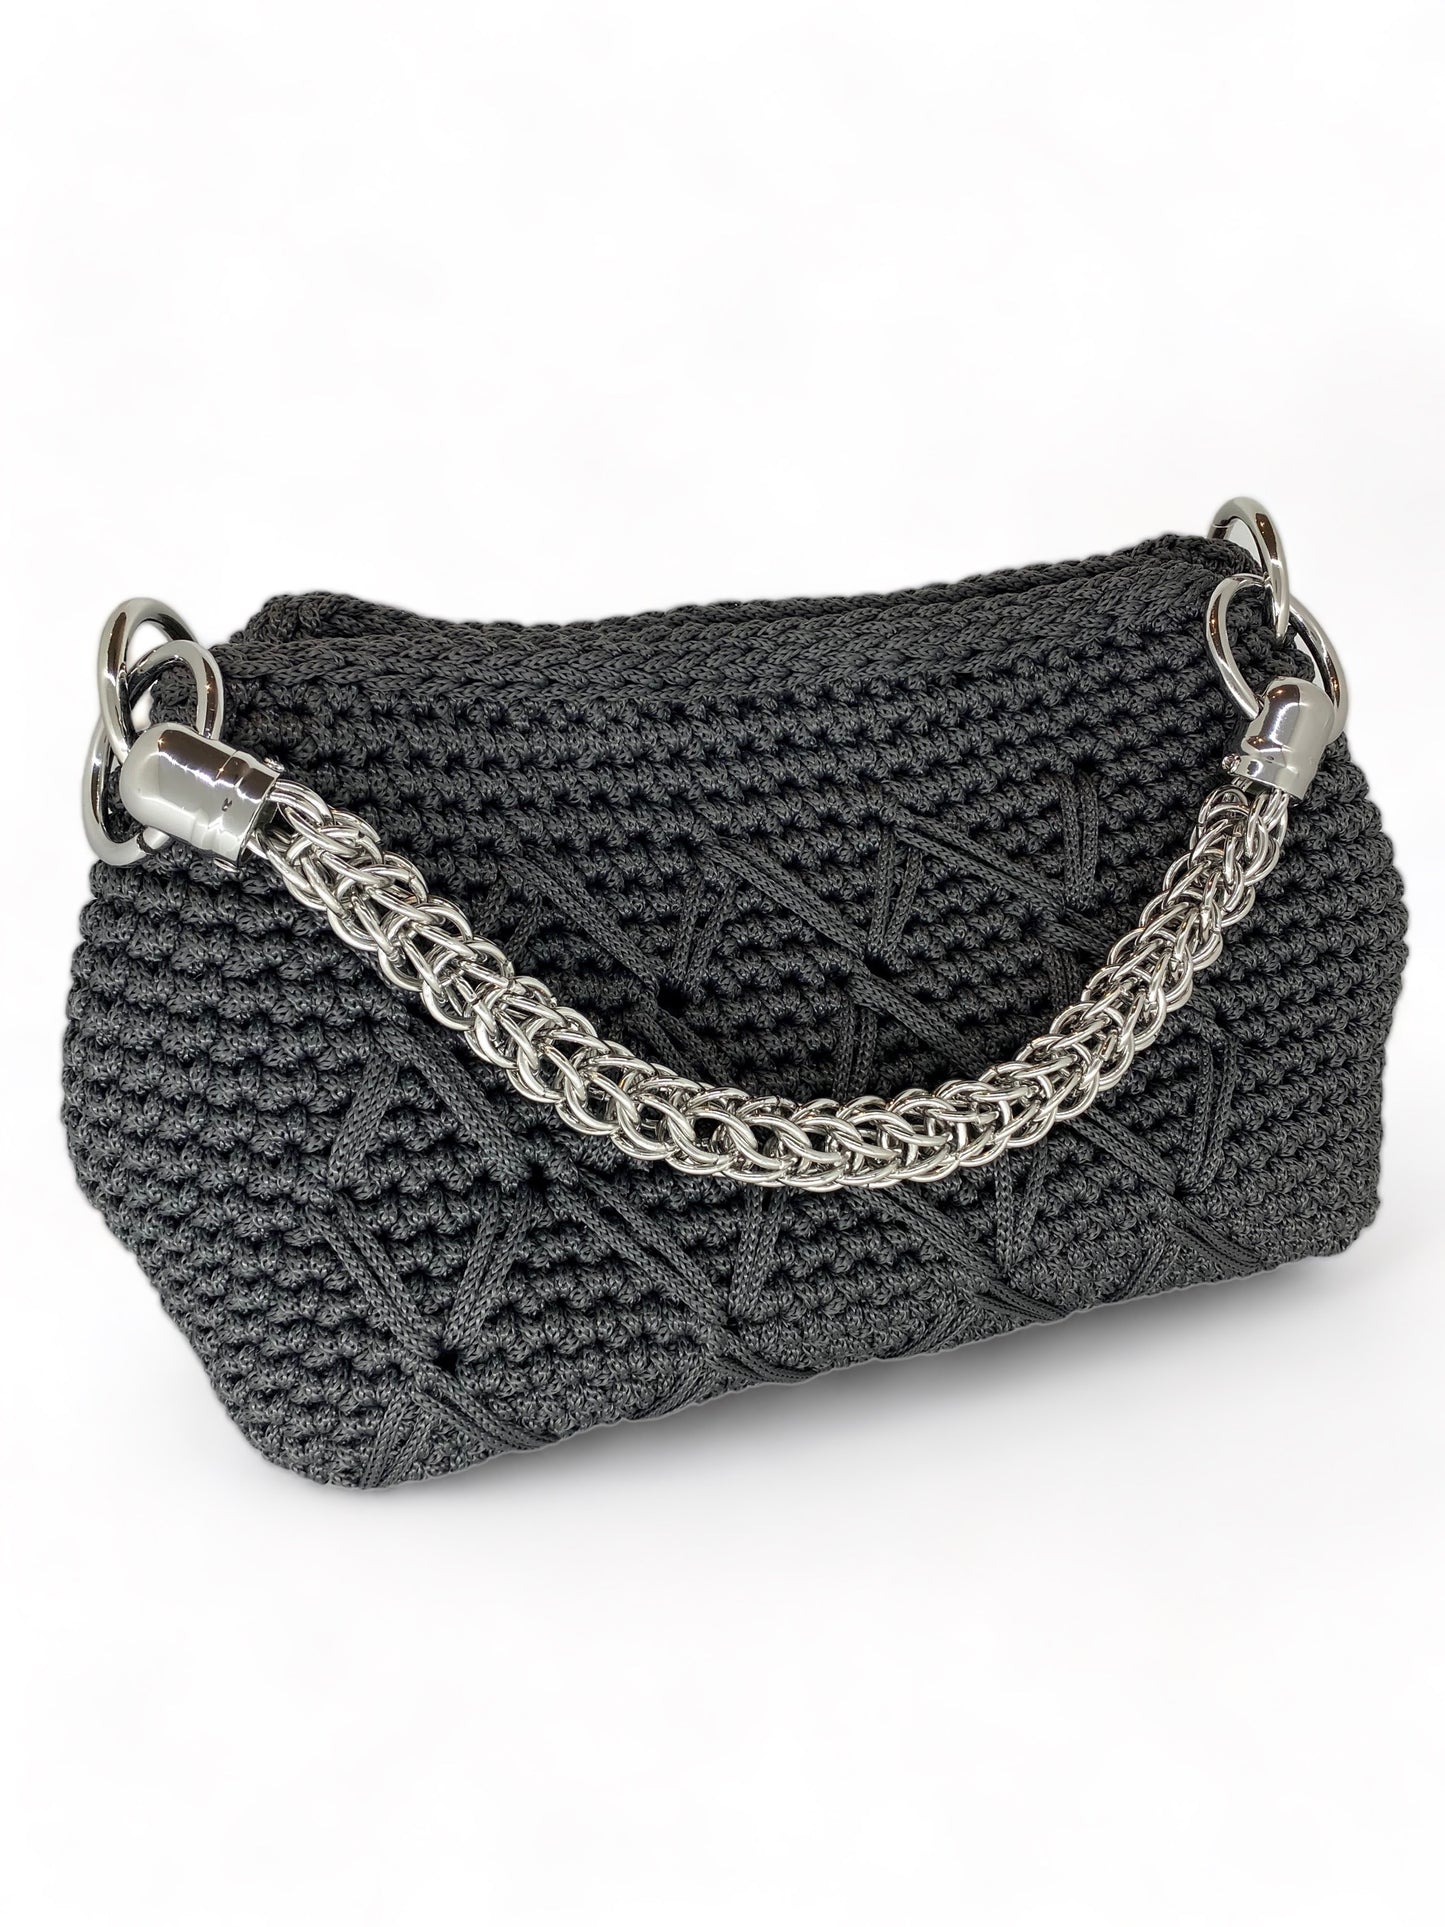 Clutch purse with glamorous handle